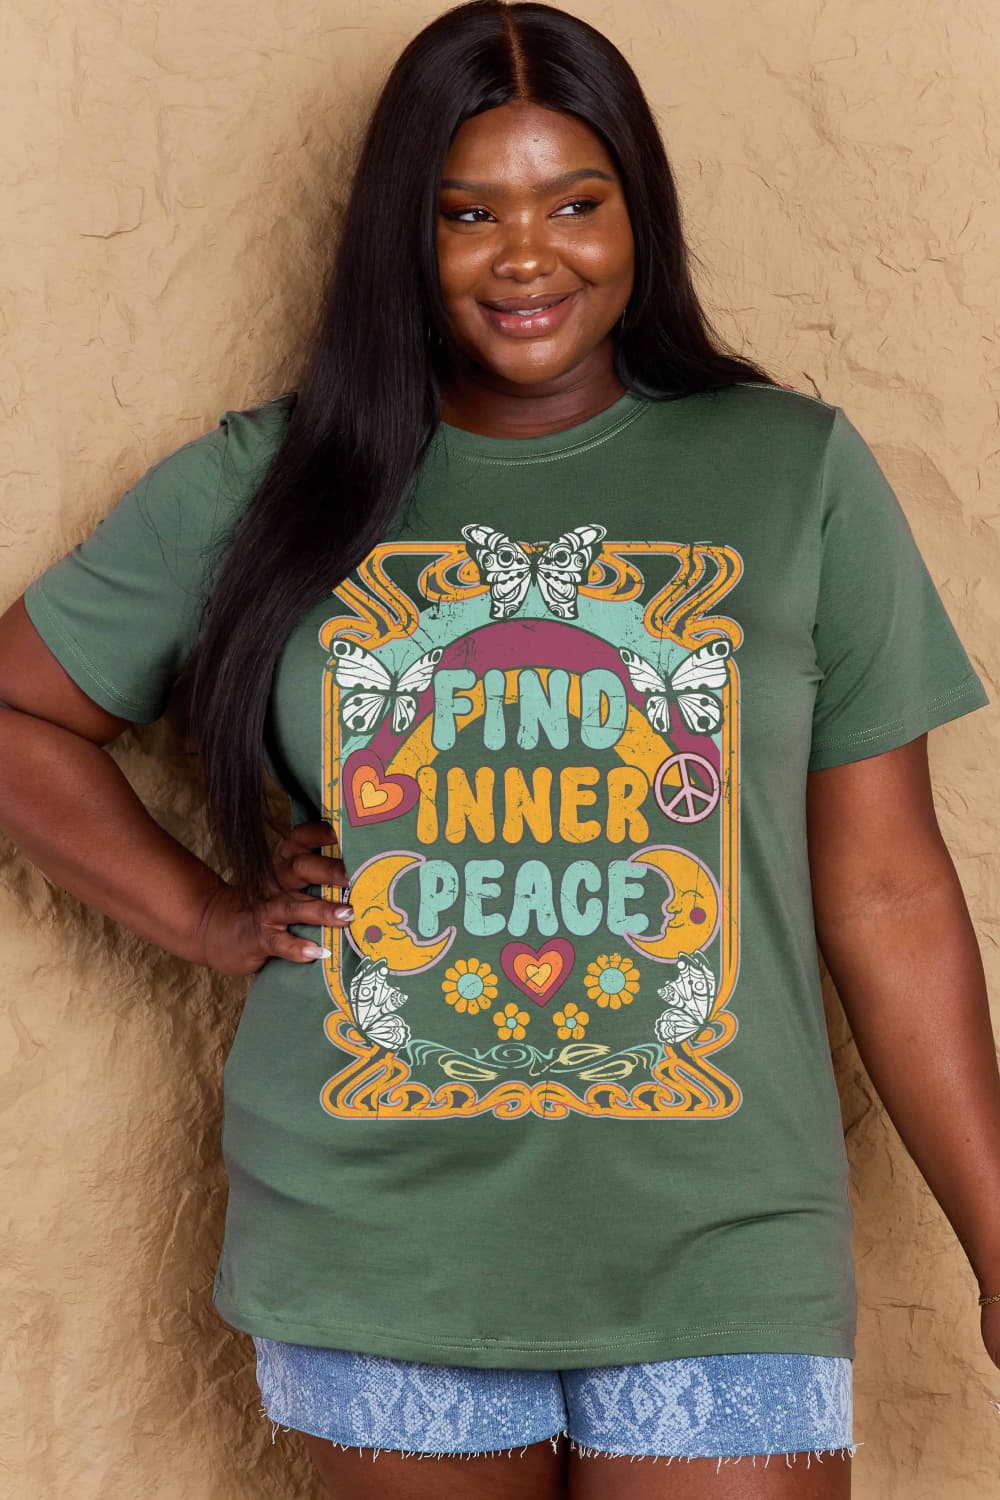 Full Size FIND INNER PEACE Graphic Cotton T-Shirt